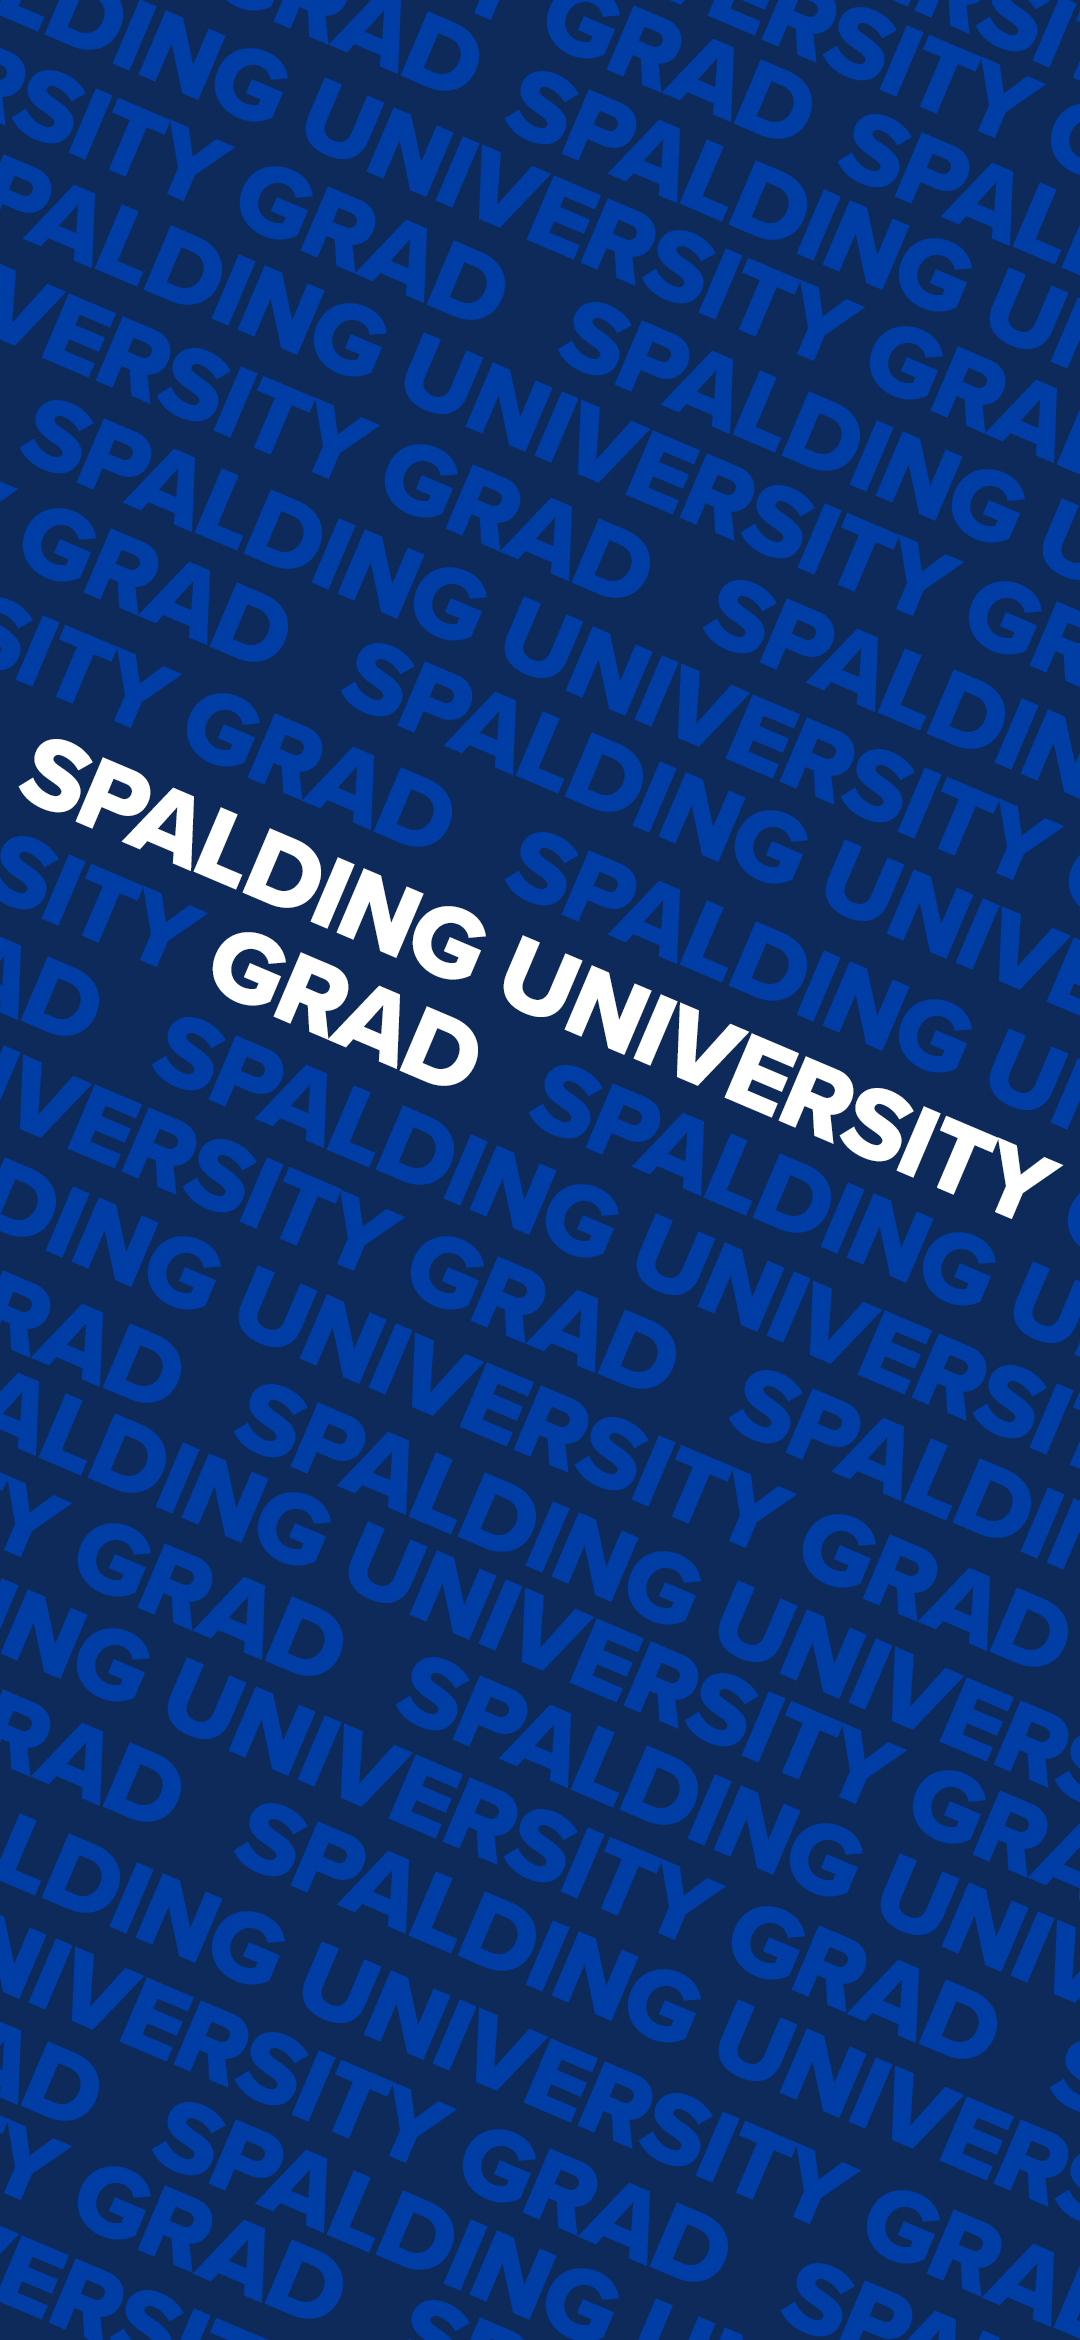 Spalding University graduate wallpaper, navy background with blue and white text